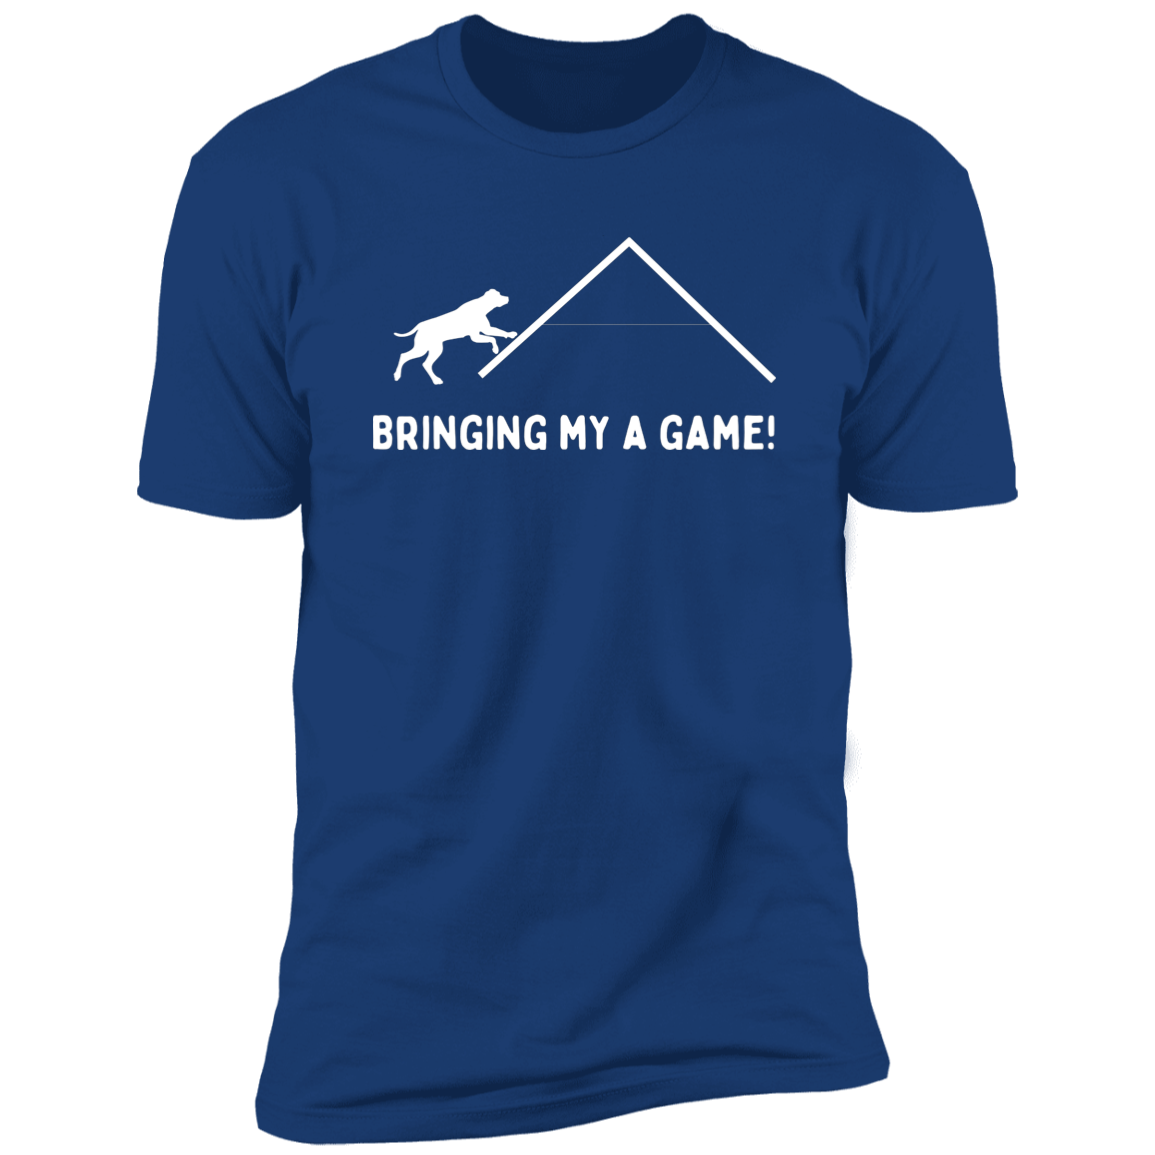 Bringing My A Game Agility T-shirt, Dog Agility Shirt for humans, in royal blue